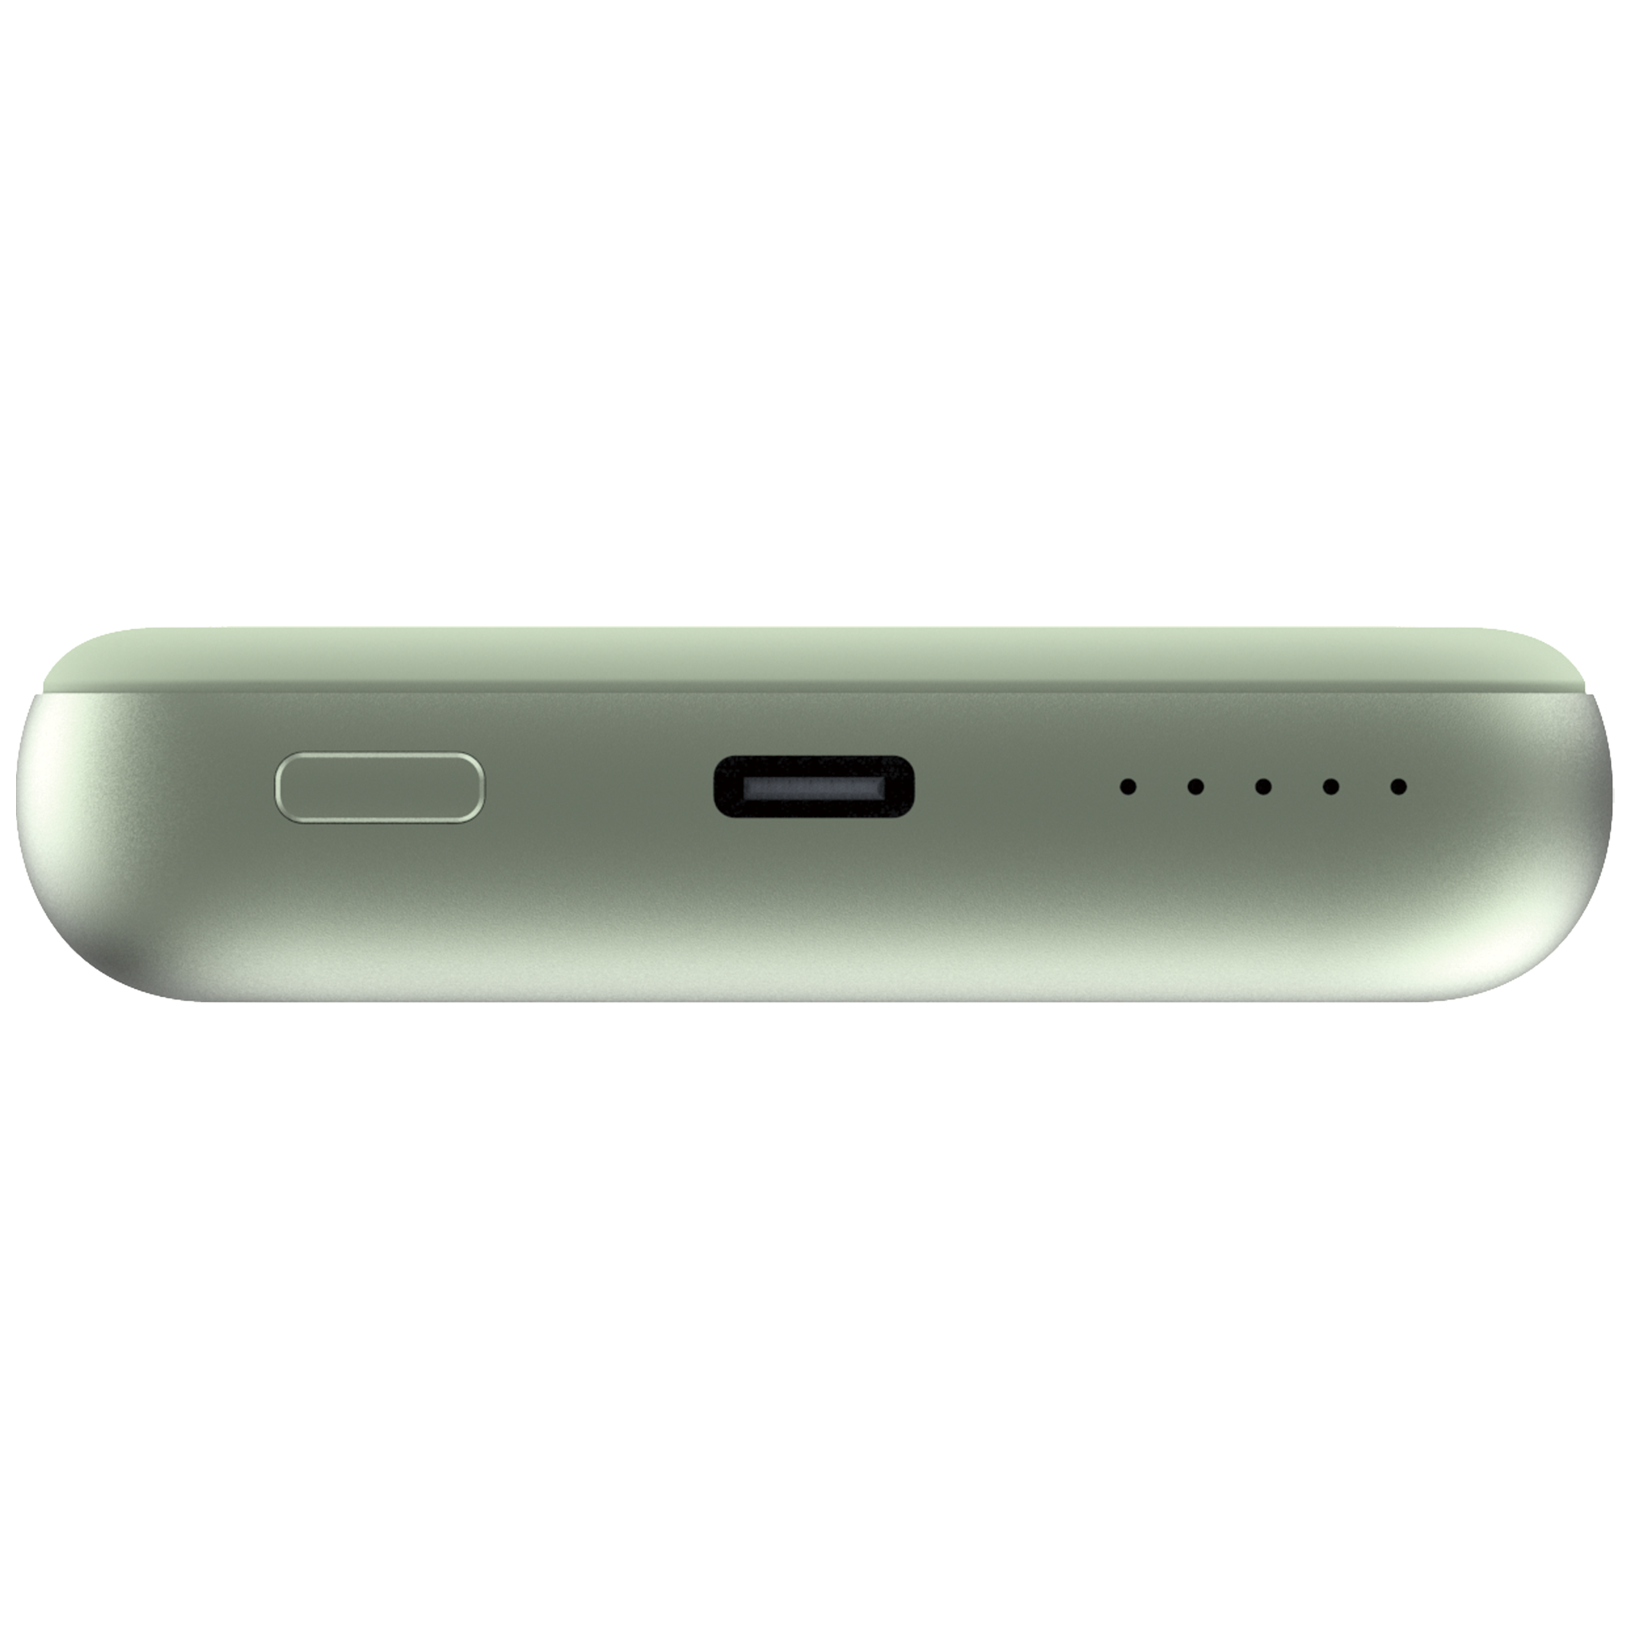 Charge 'n' Go Magnetic Wireless Power Bank 10000mAh Verde